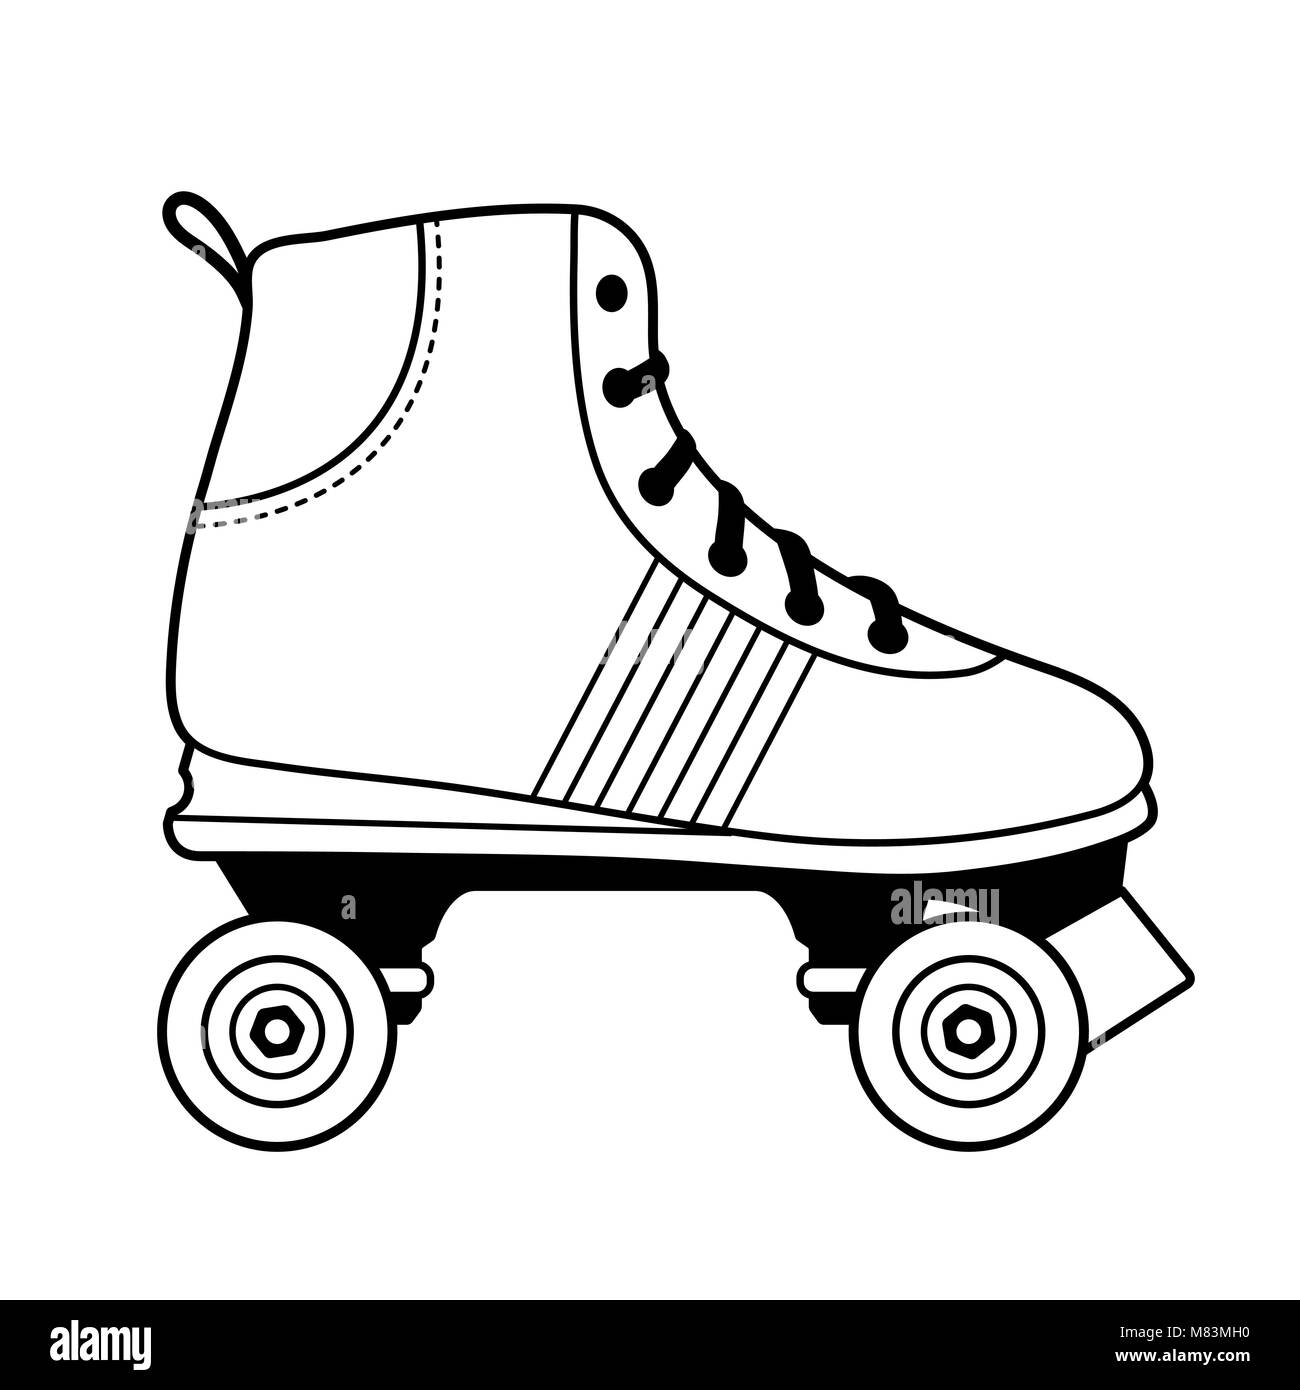 Vector illustration of a black and white roller skating shoe isolated on white background Stock Vector